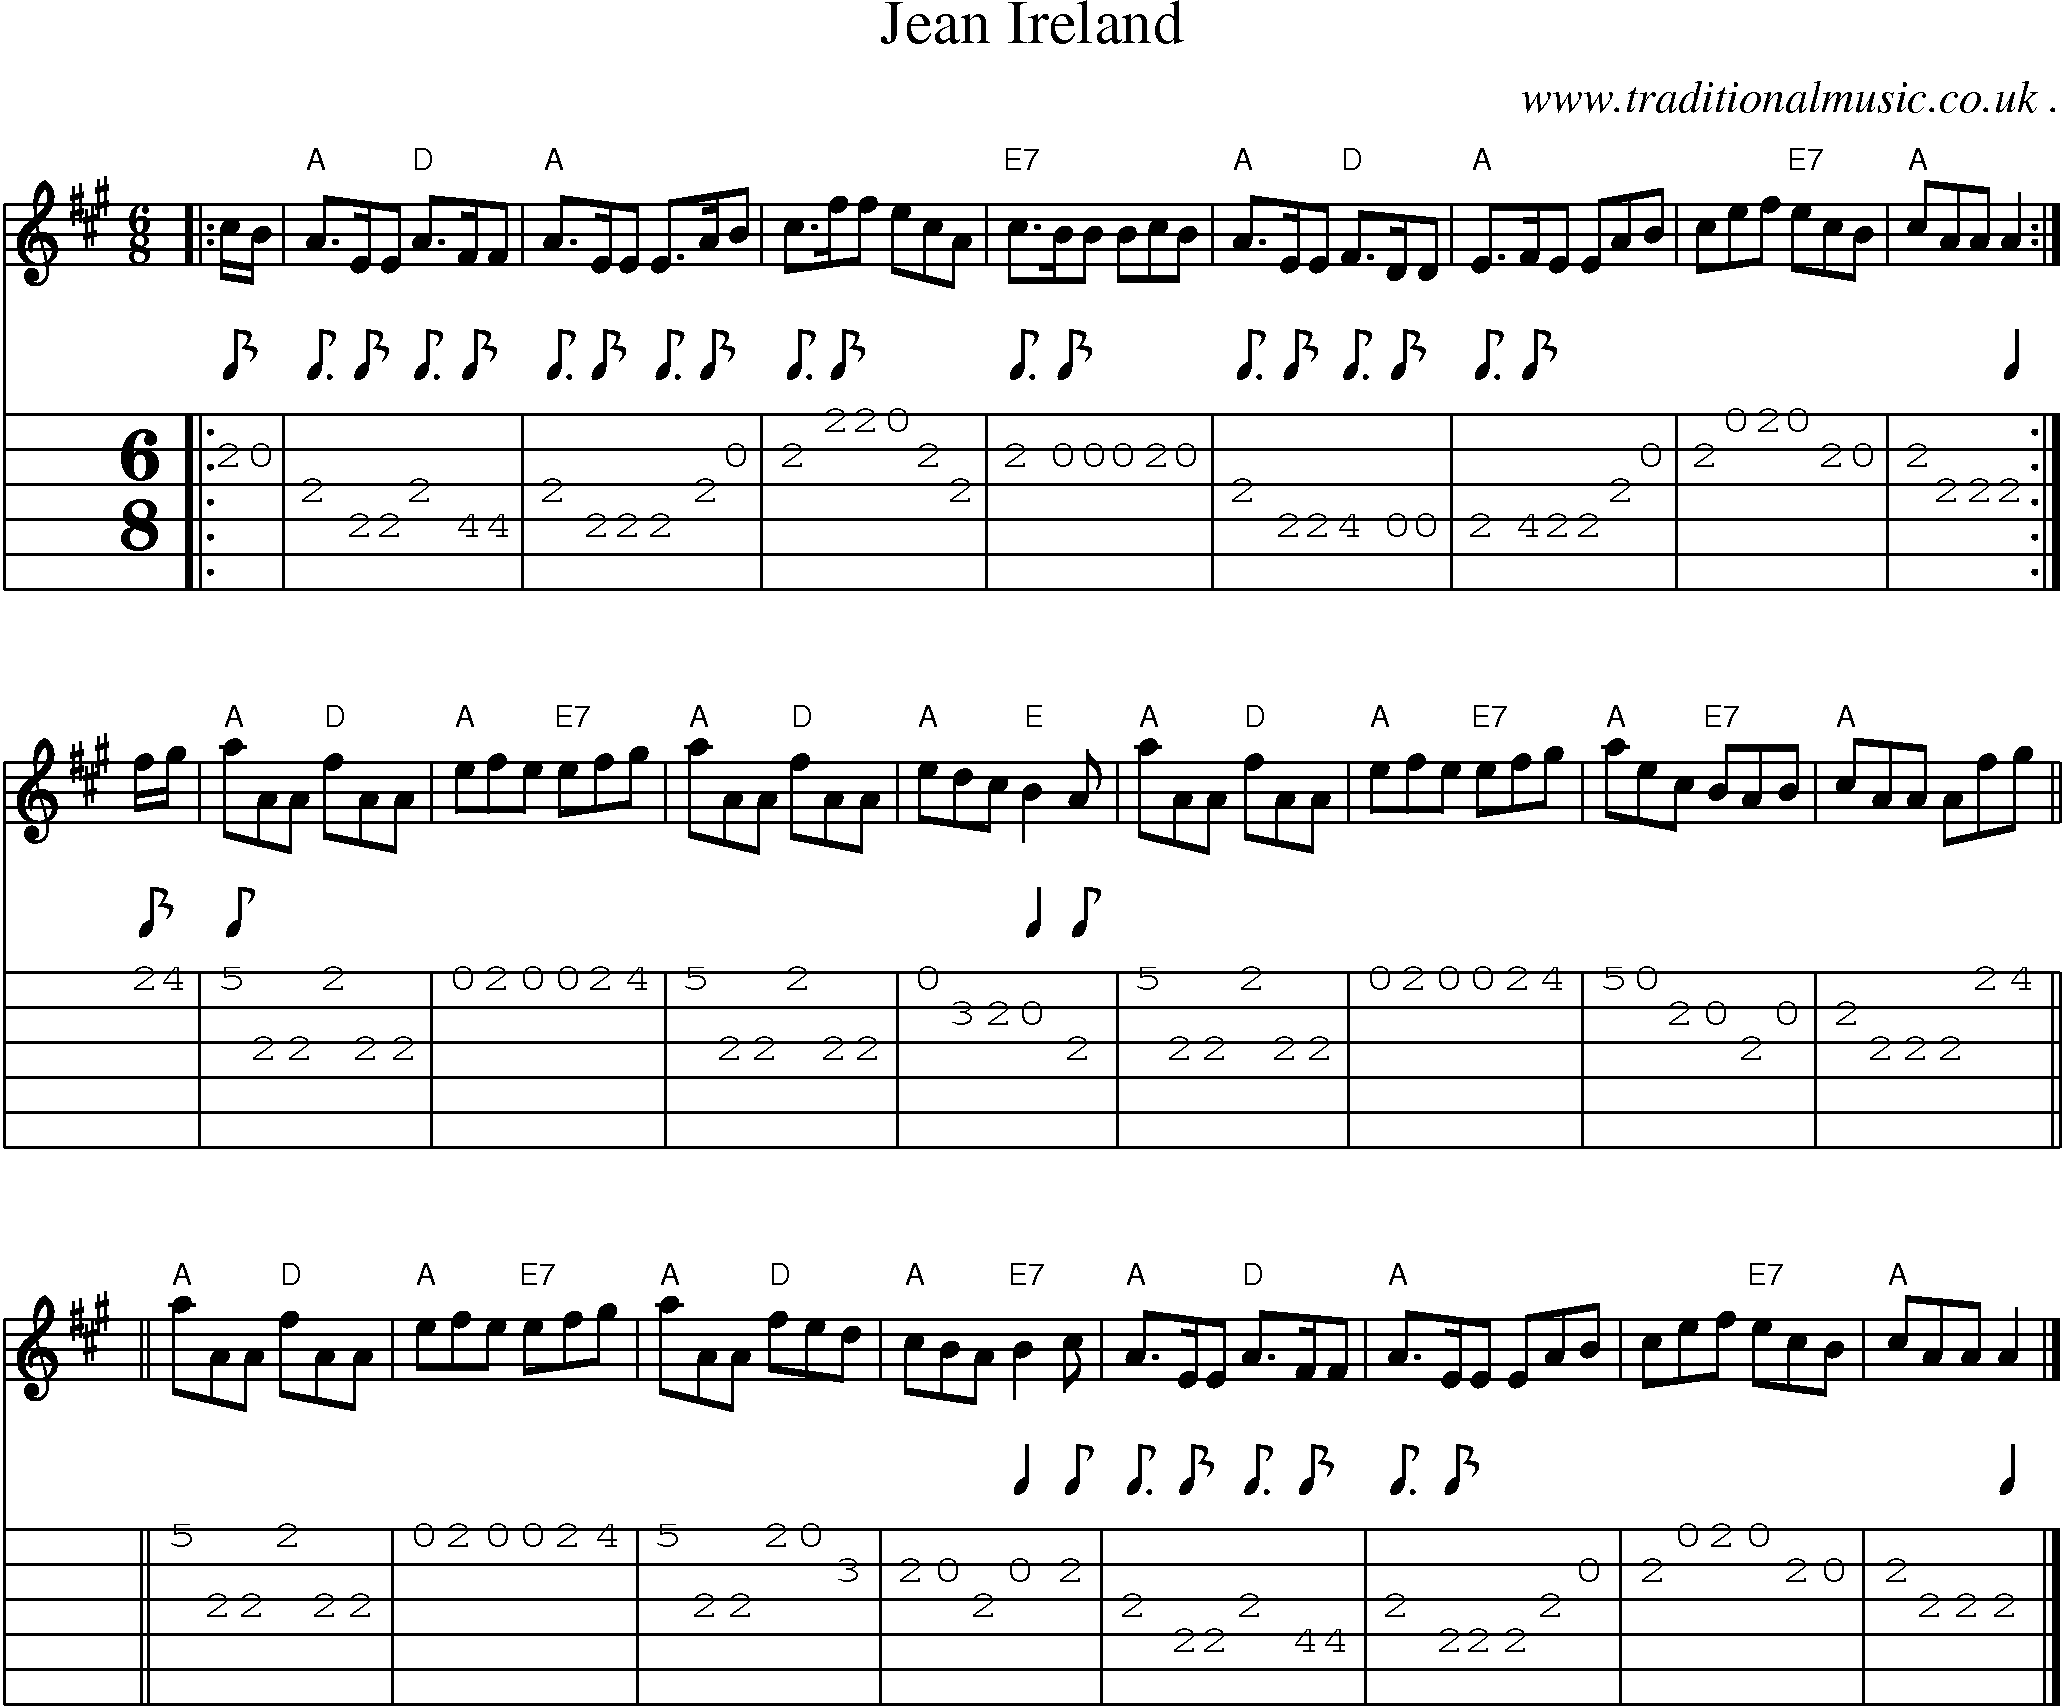 Sheet-music  score, Chords and Guitar Tabs for Jean Ireland